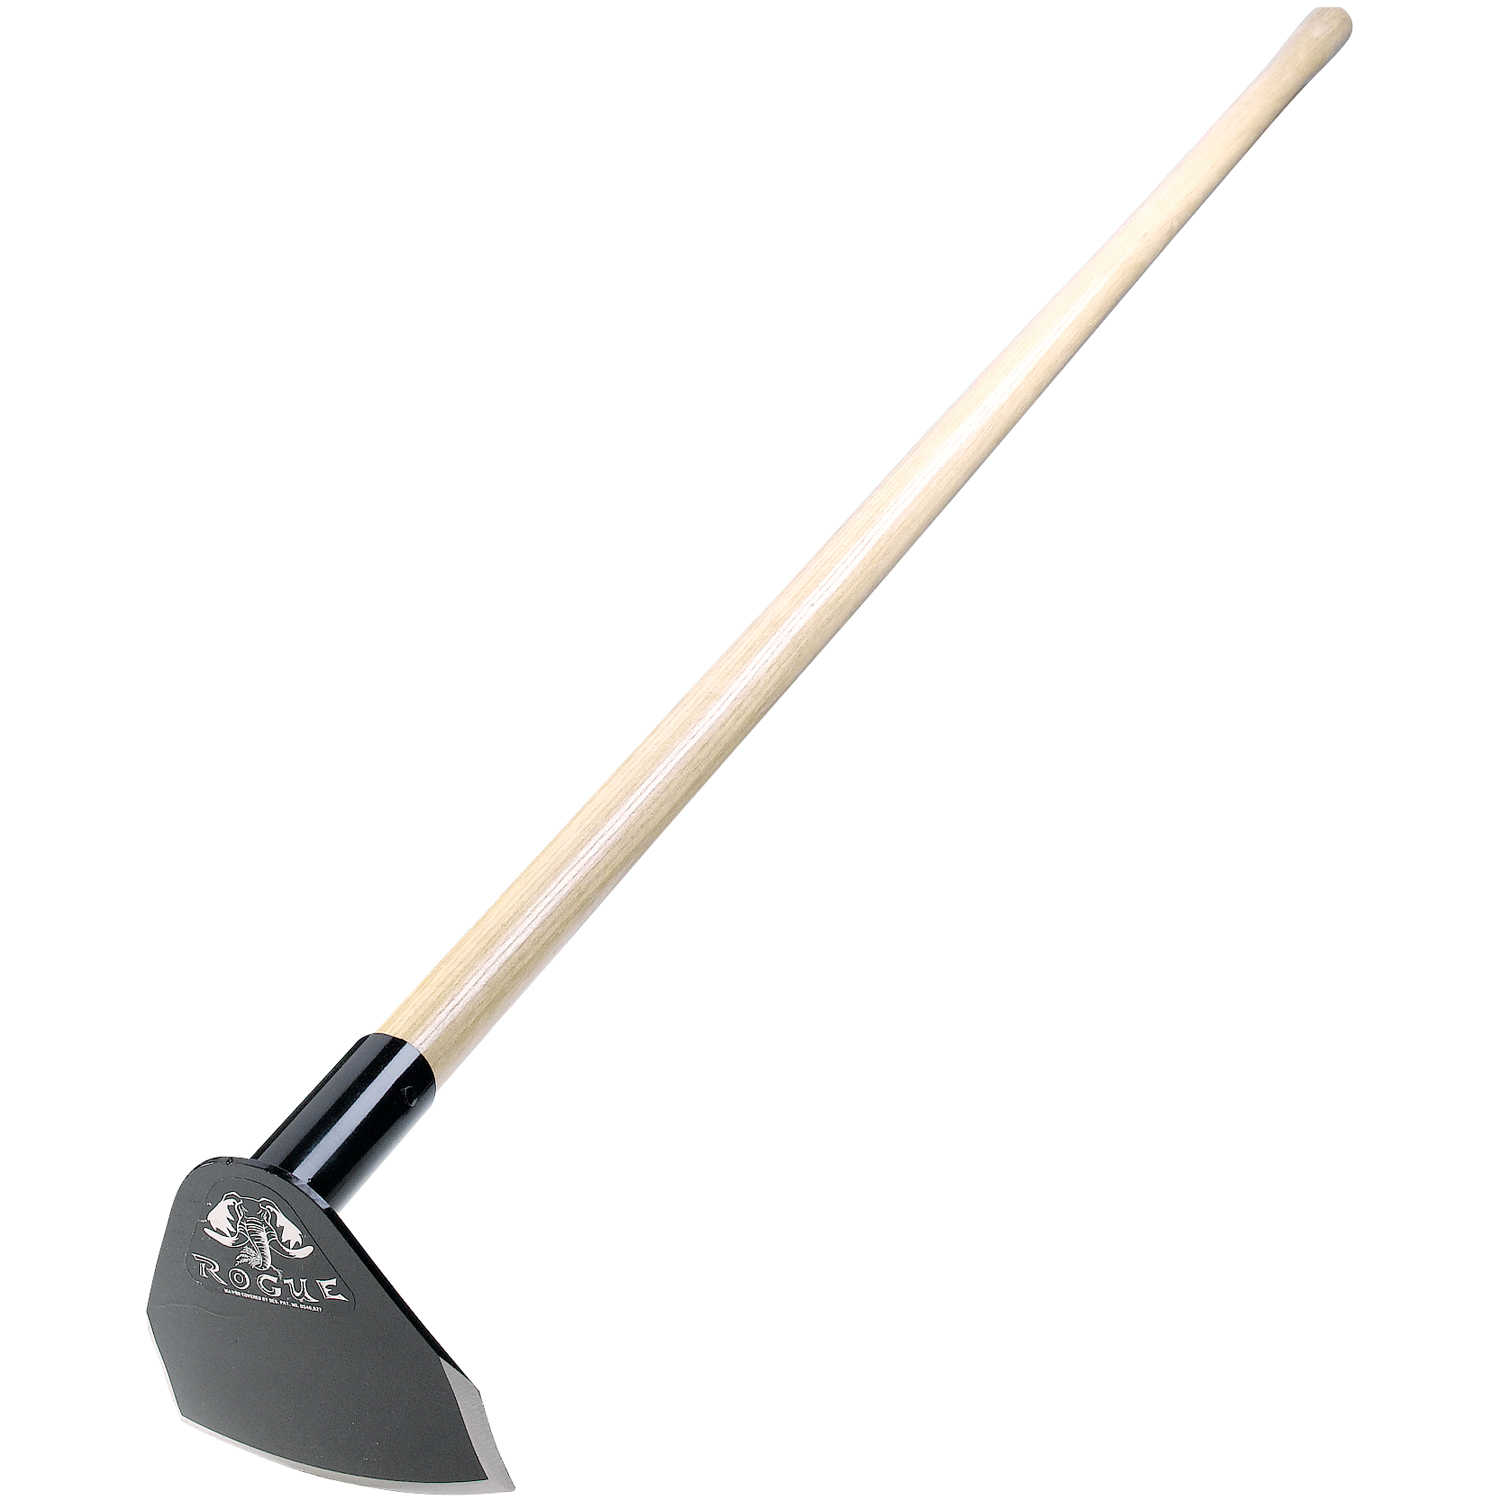 Hoes Rogue Hoe Field Hoes | Forestry Suppliers, Inc.